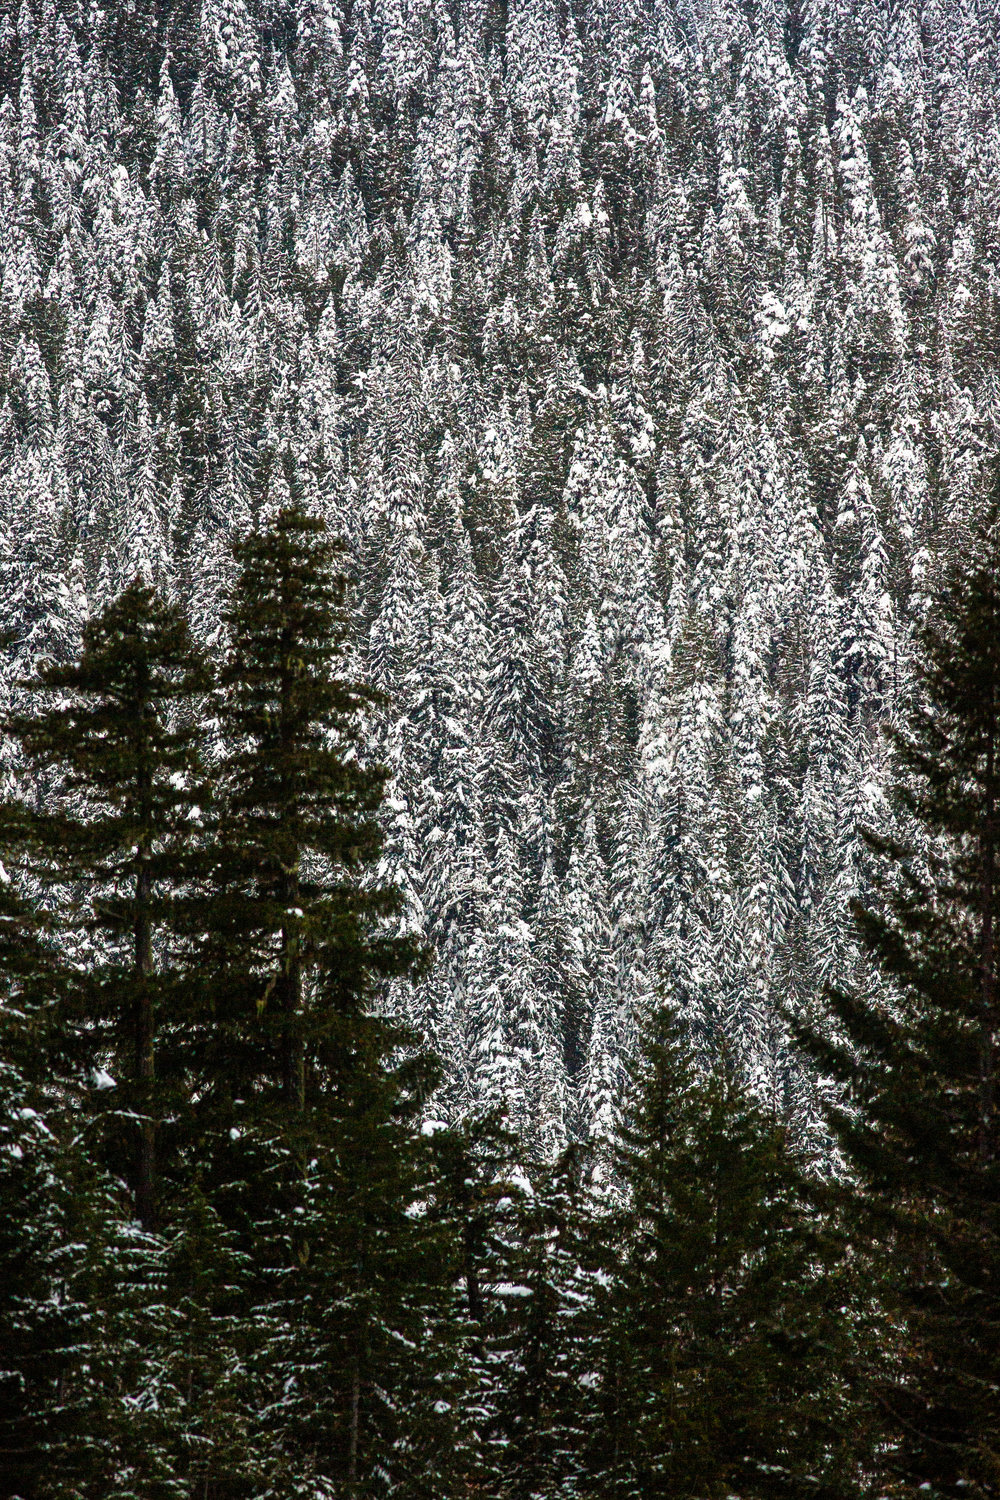 Snow covers trees high on the foothills of the Cascade Mountains along U.S. Highway 12 near White Pass on Tuesday.